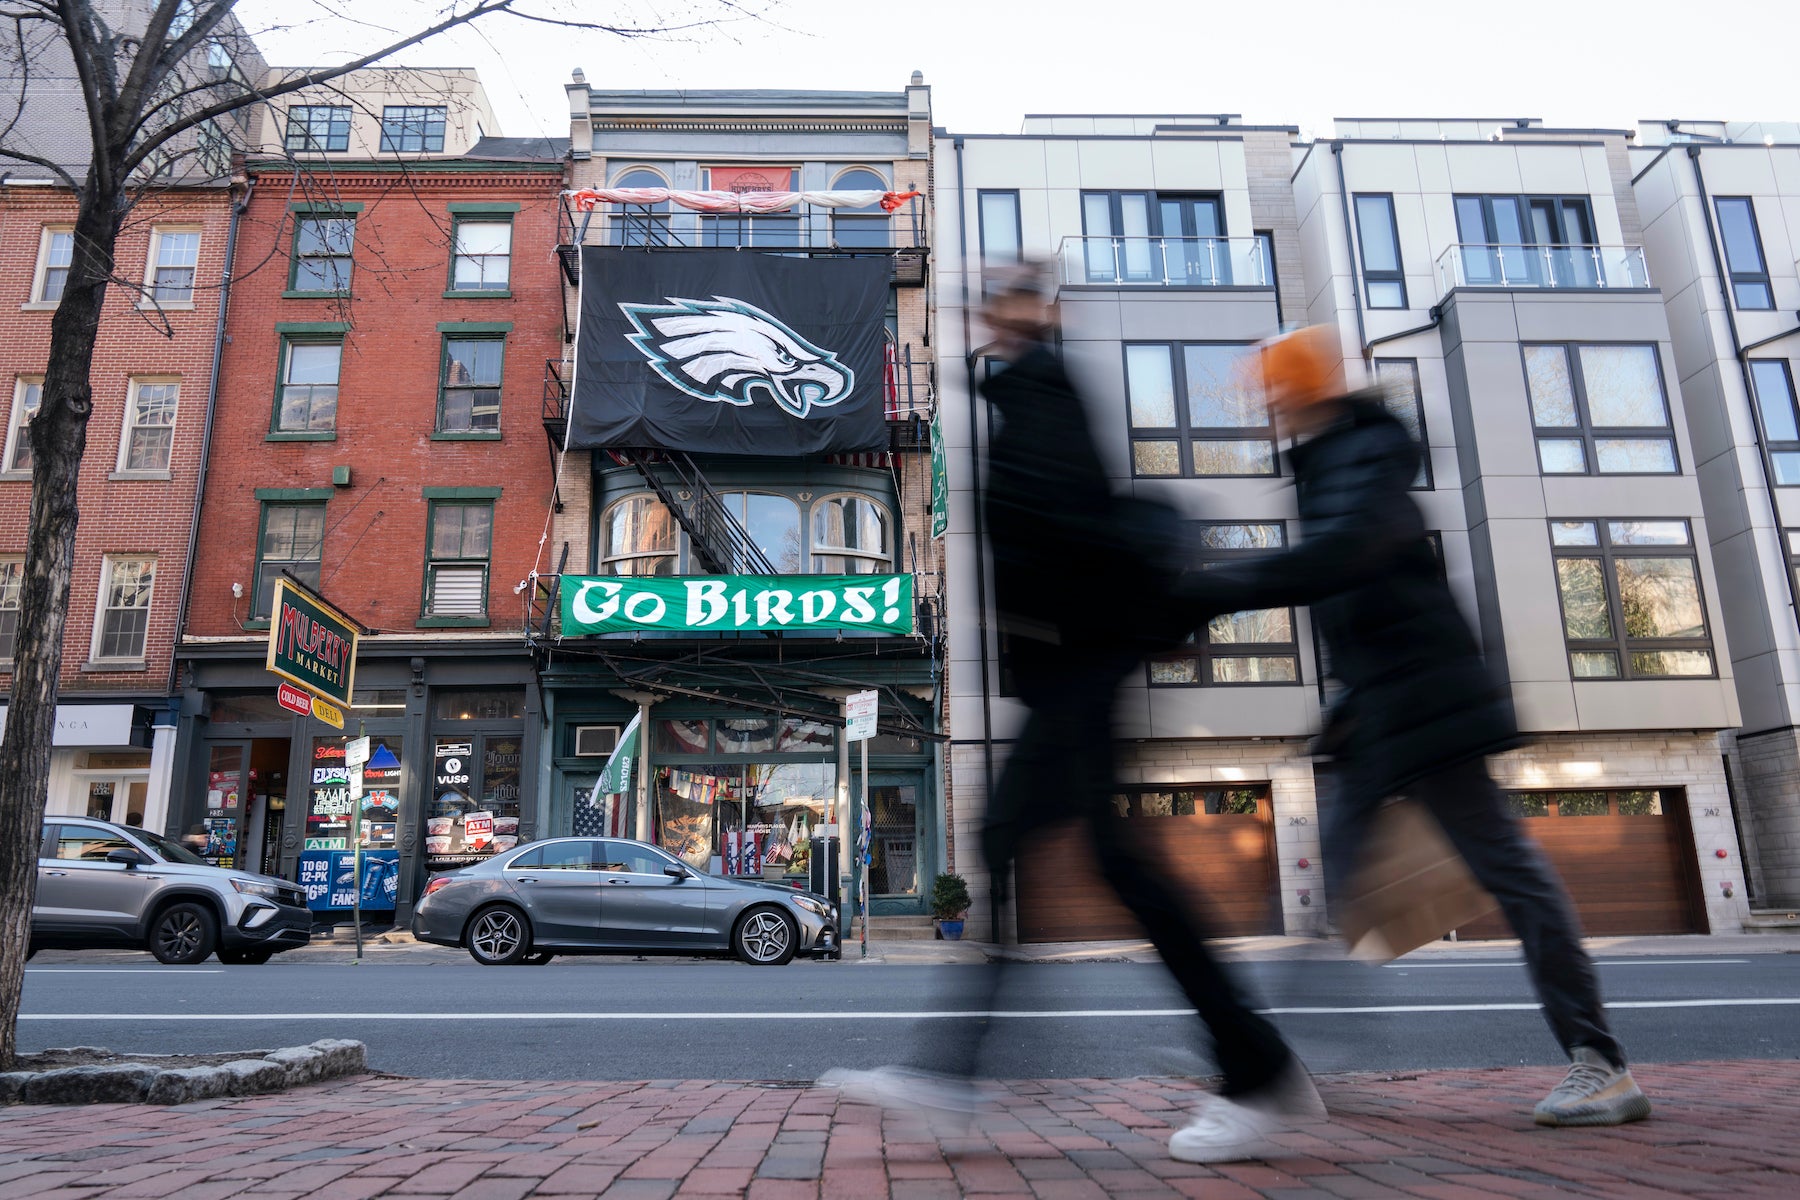 Celebration underway in Philly as Eagles advance to Super Bowl